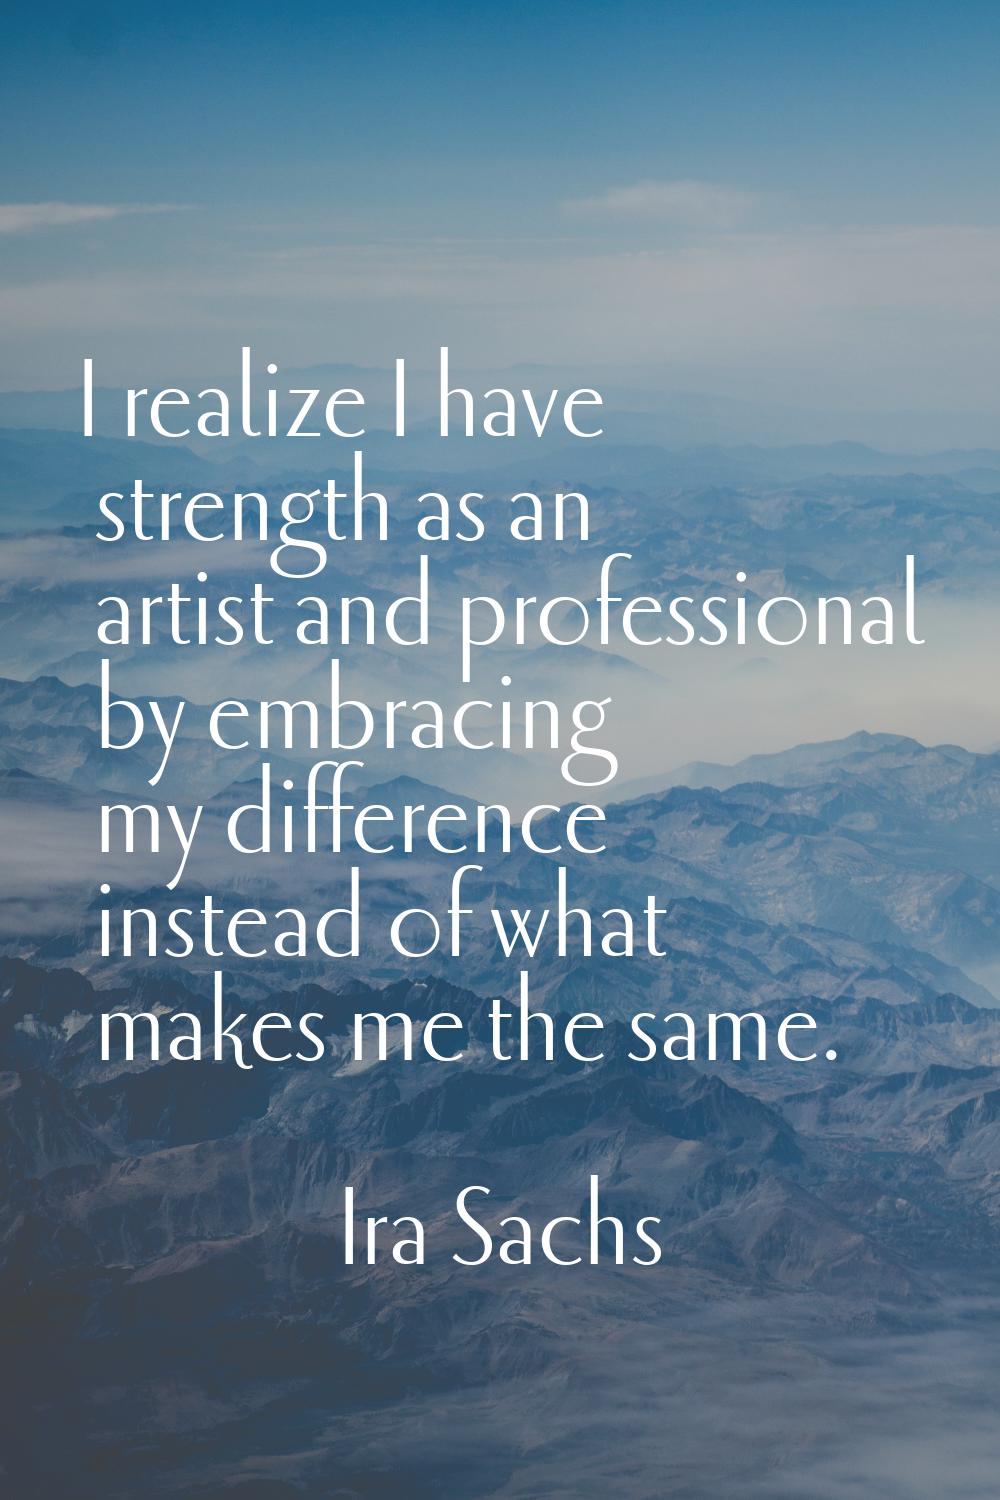 I realize I have strength as an artist and professional by embracing my difference instead of what 